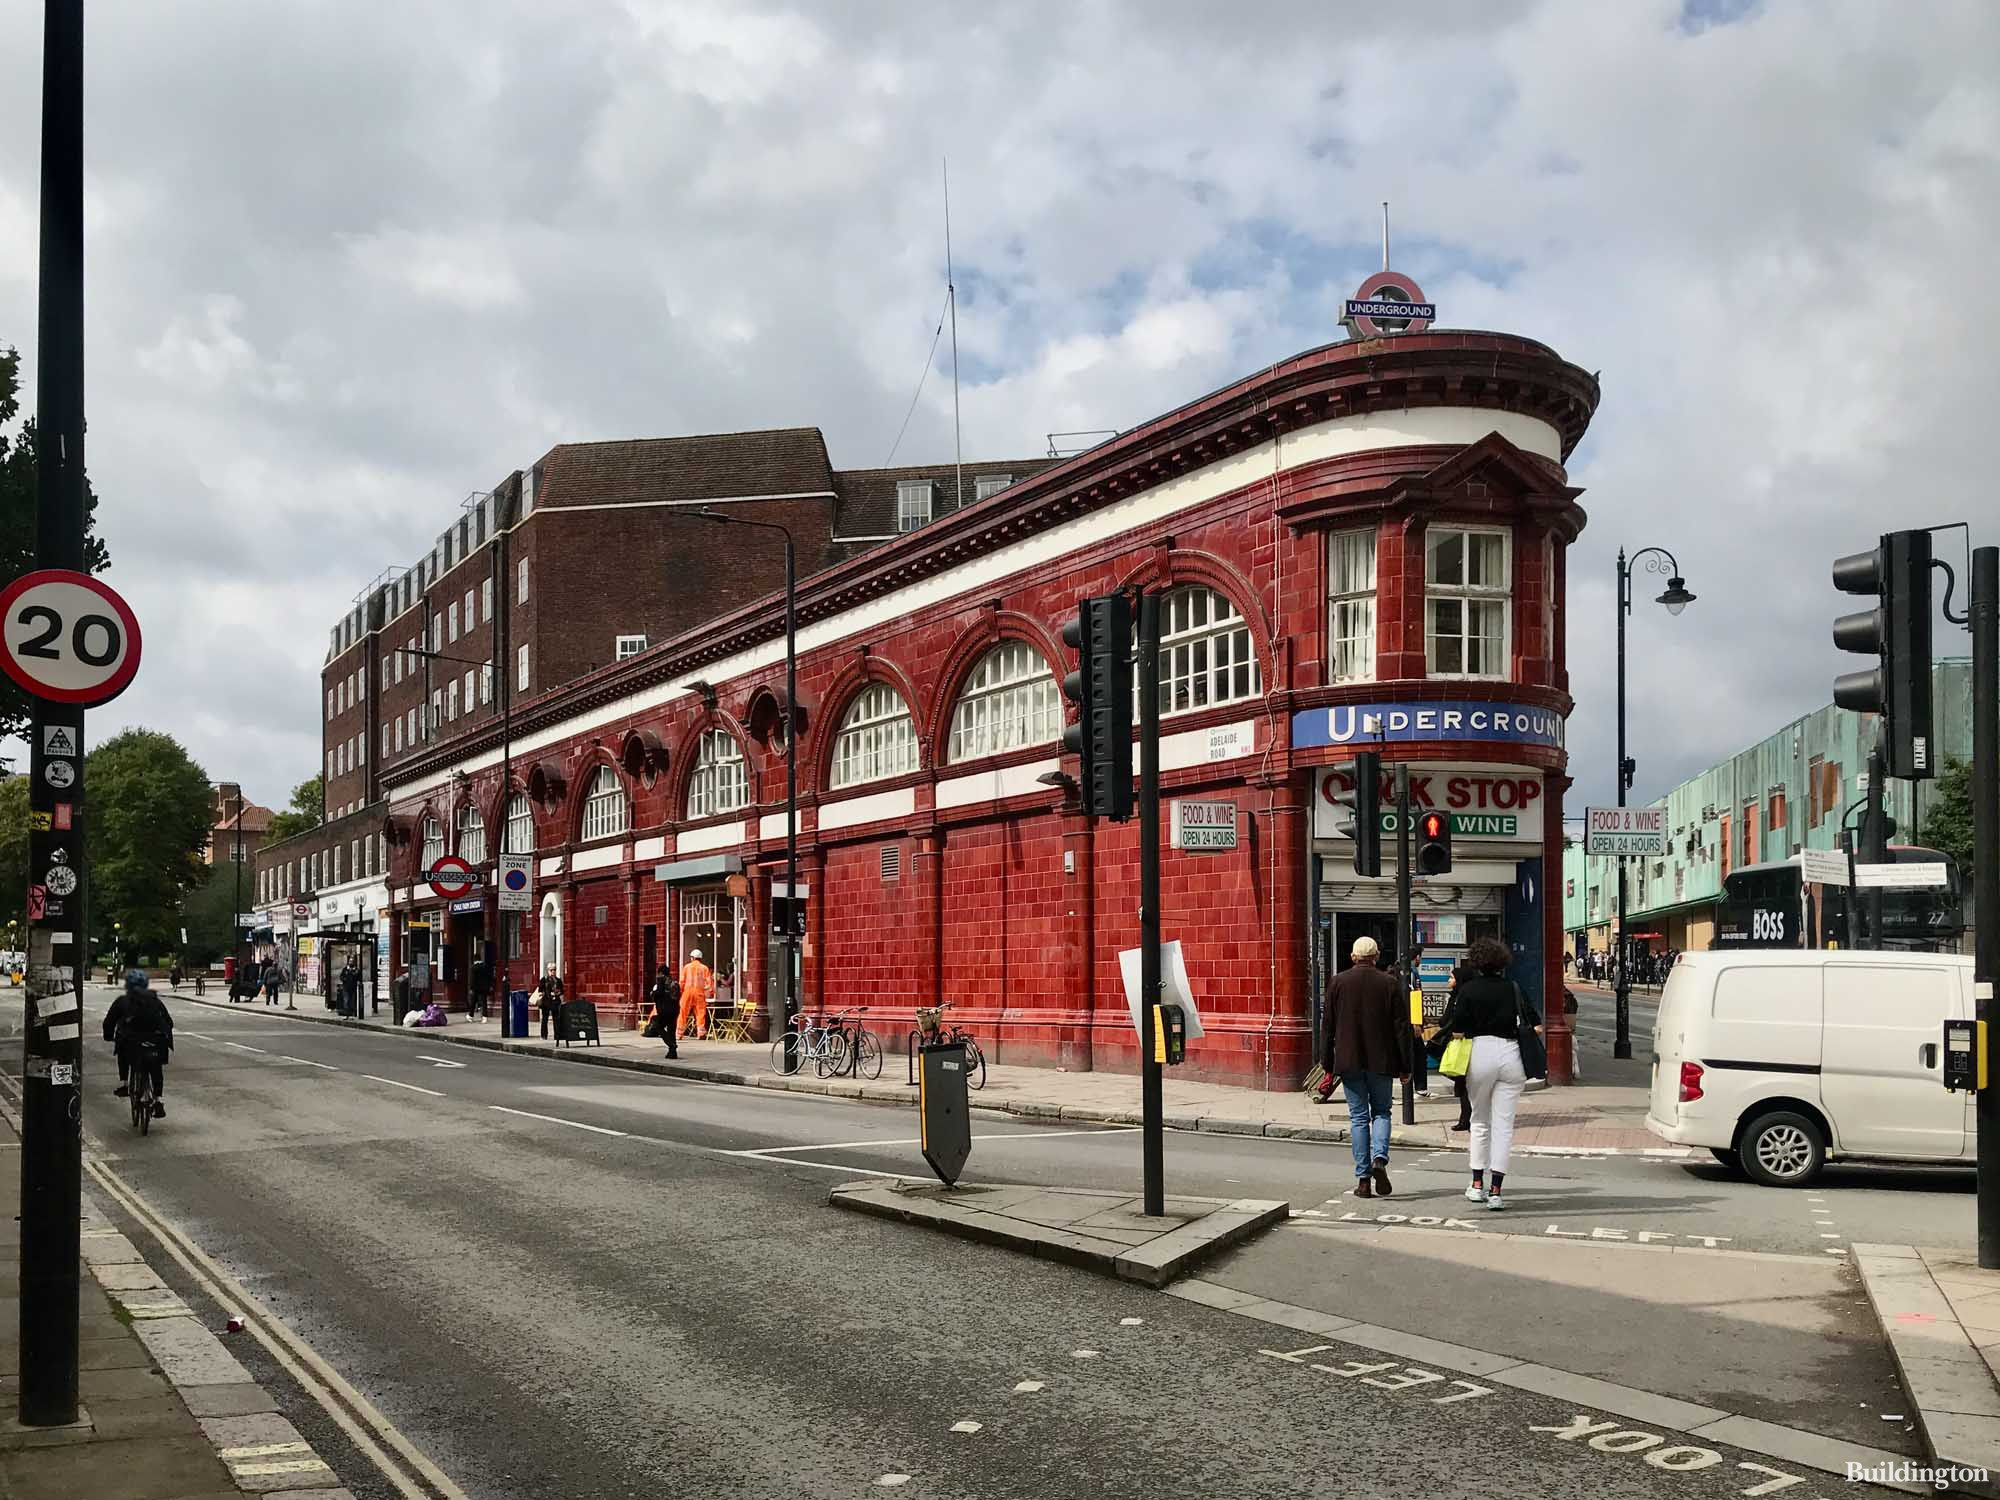 Chalk Farm Underground Station building on the corner of Chalk Farm and Haverstock Hill in London NW3.